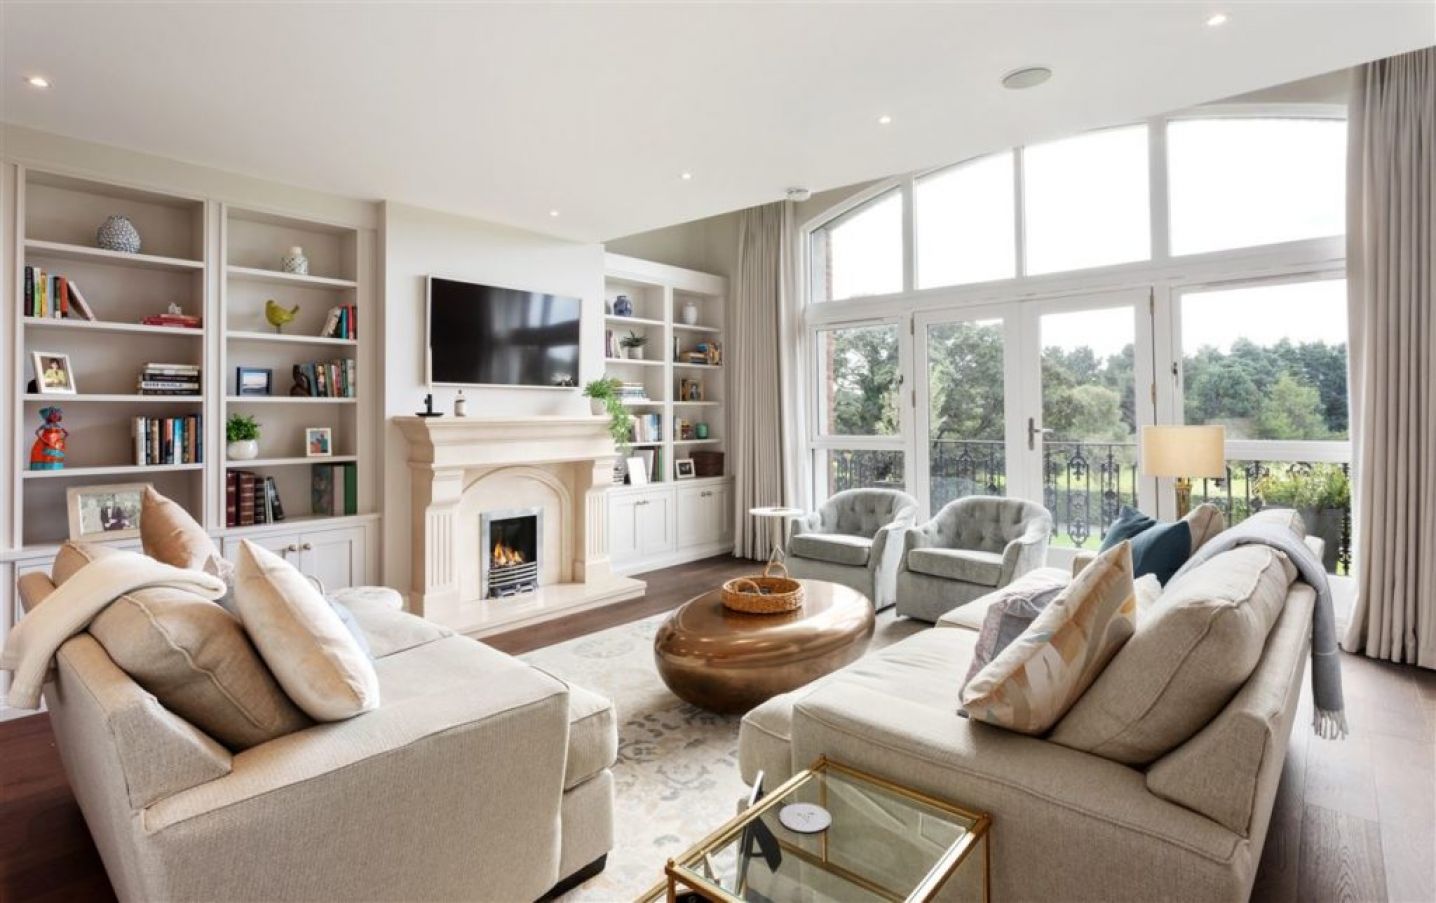 Formal Living Room. Photo: Myhome.ie